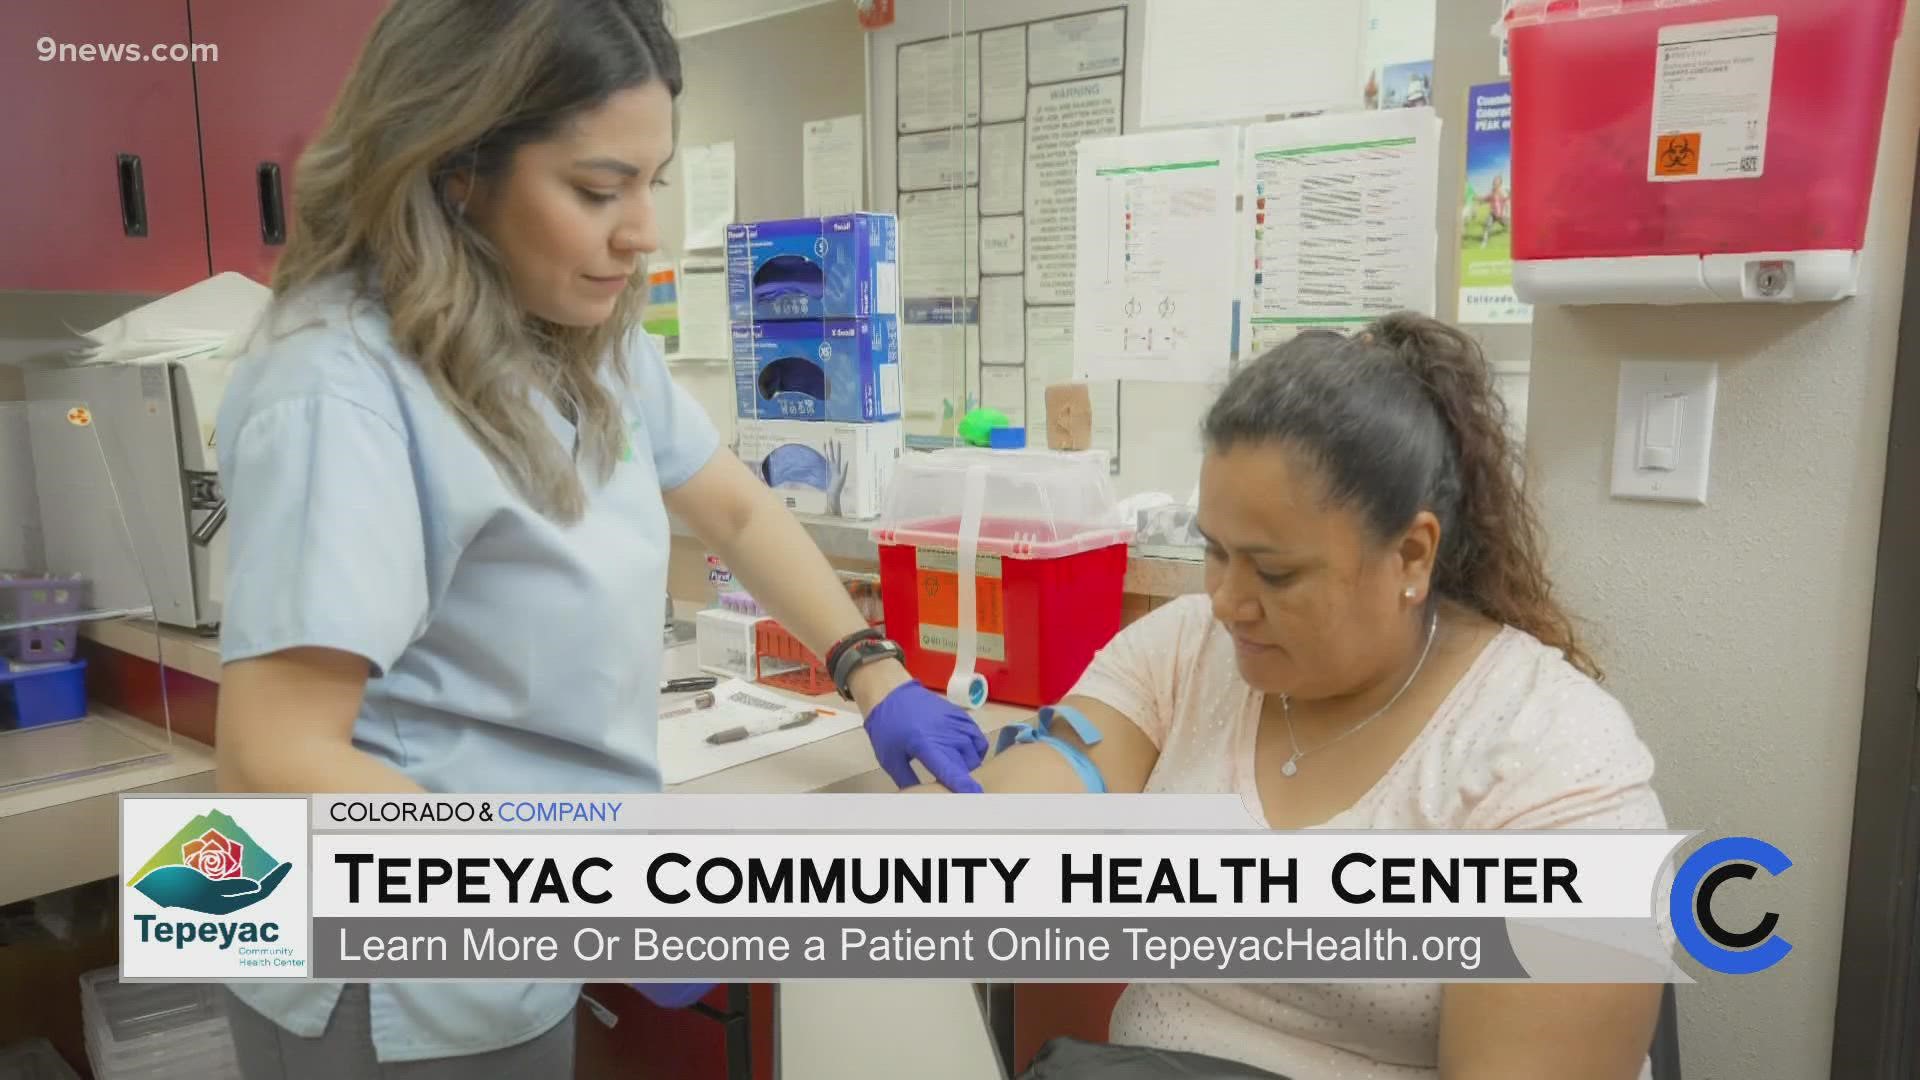 Tepeyac Community Health Center relies on donations to serve the community. Learn more and donate at TepeyacHealth.org.